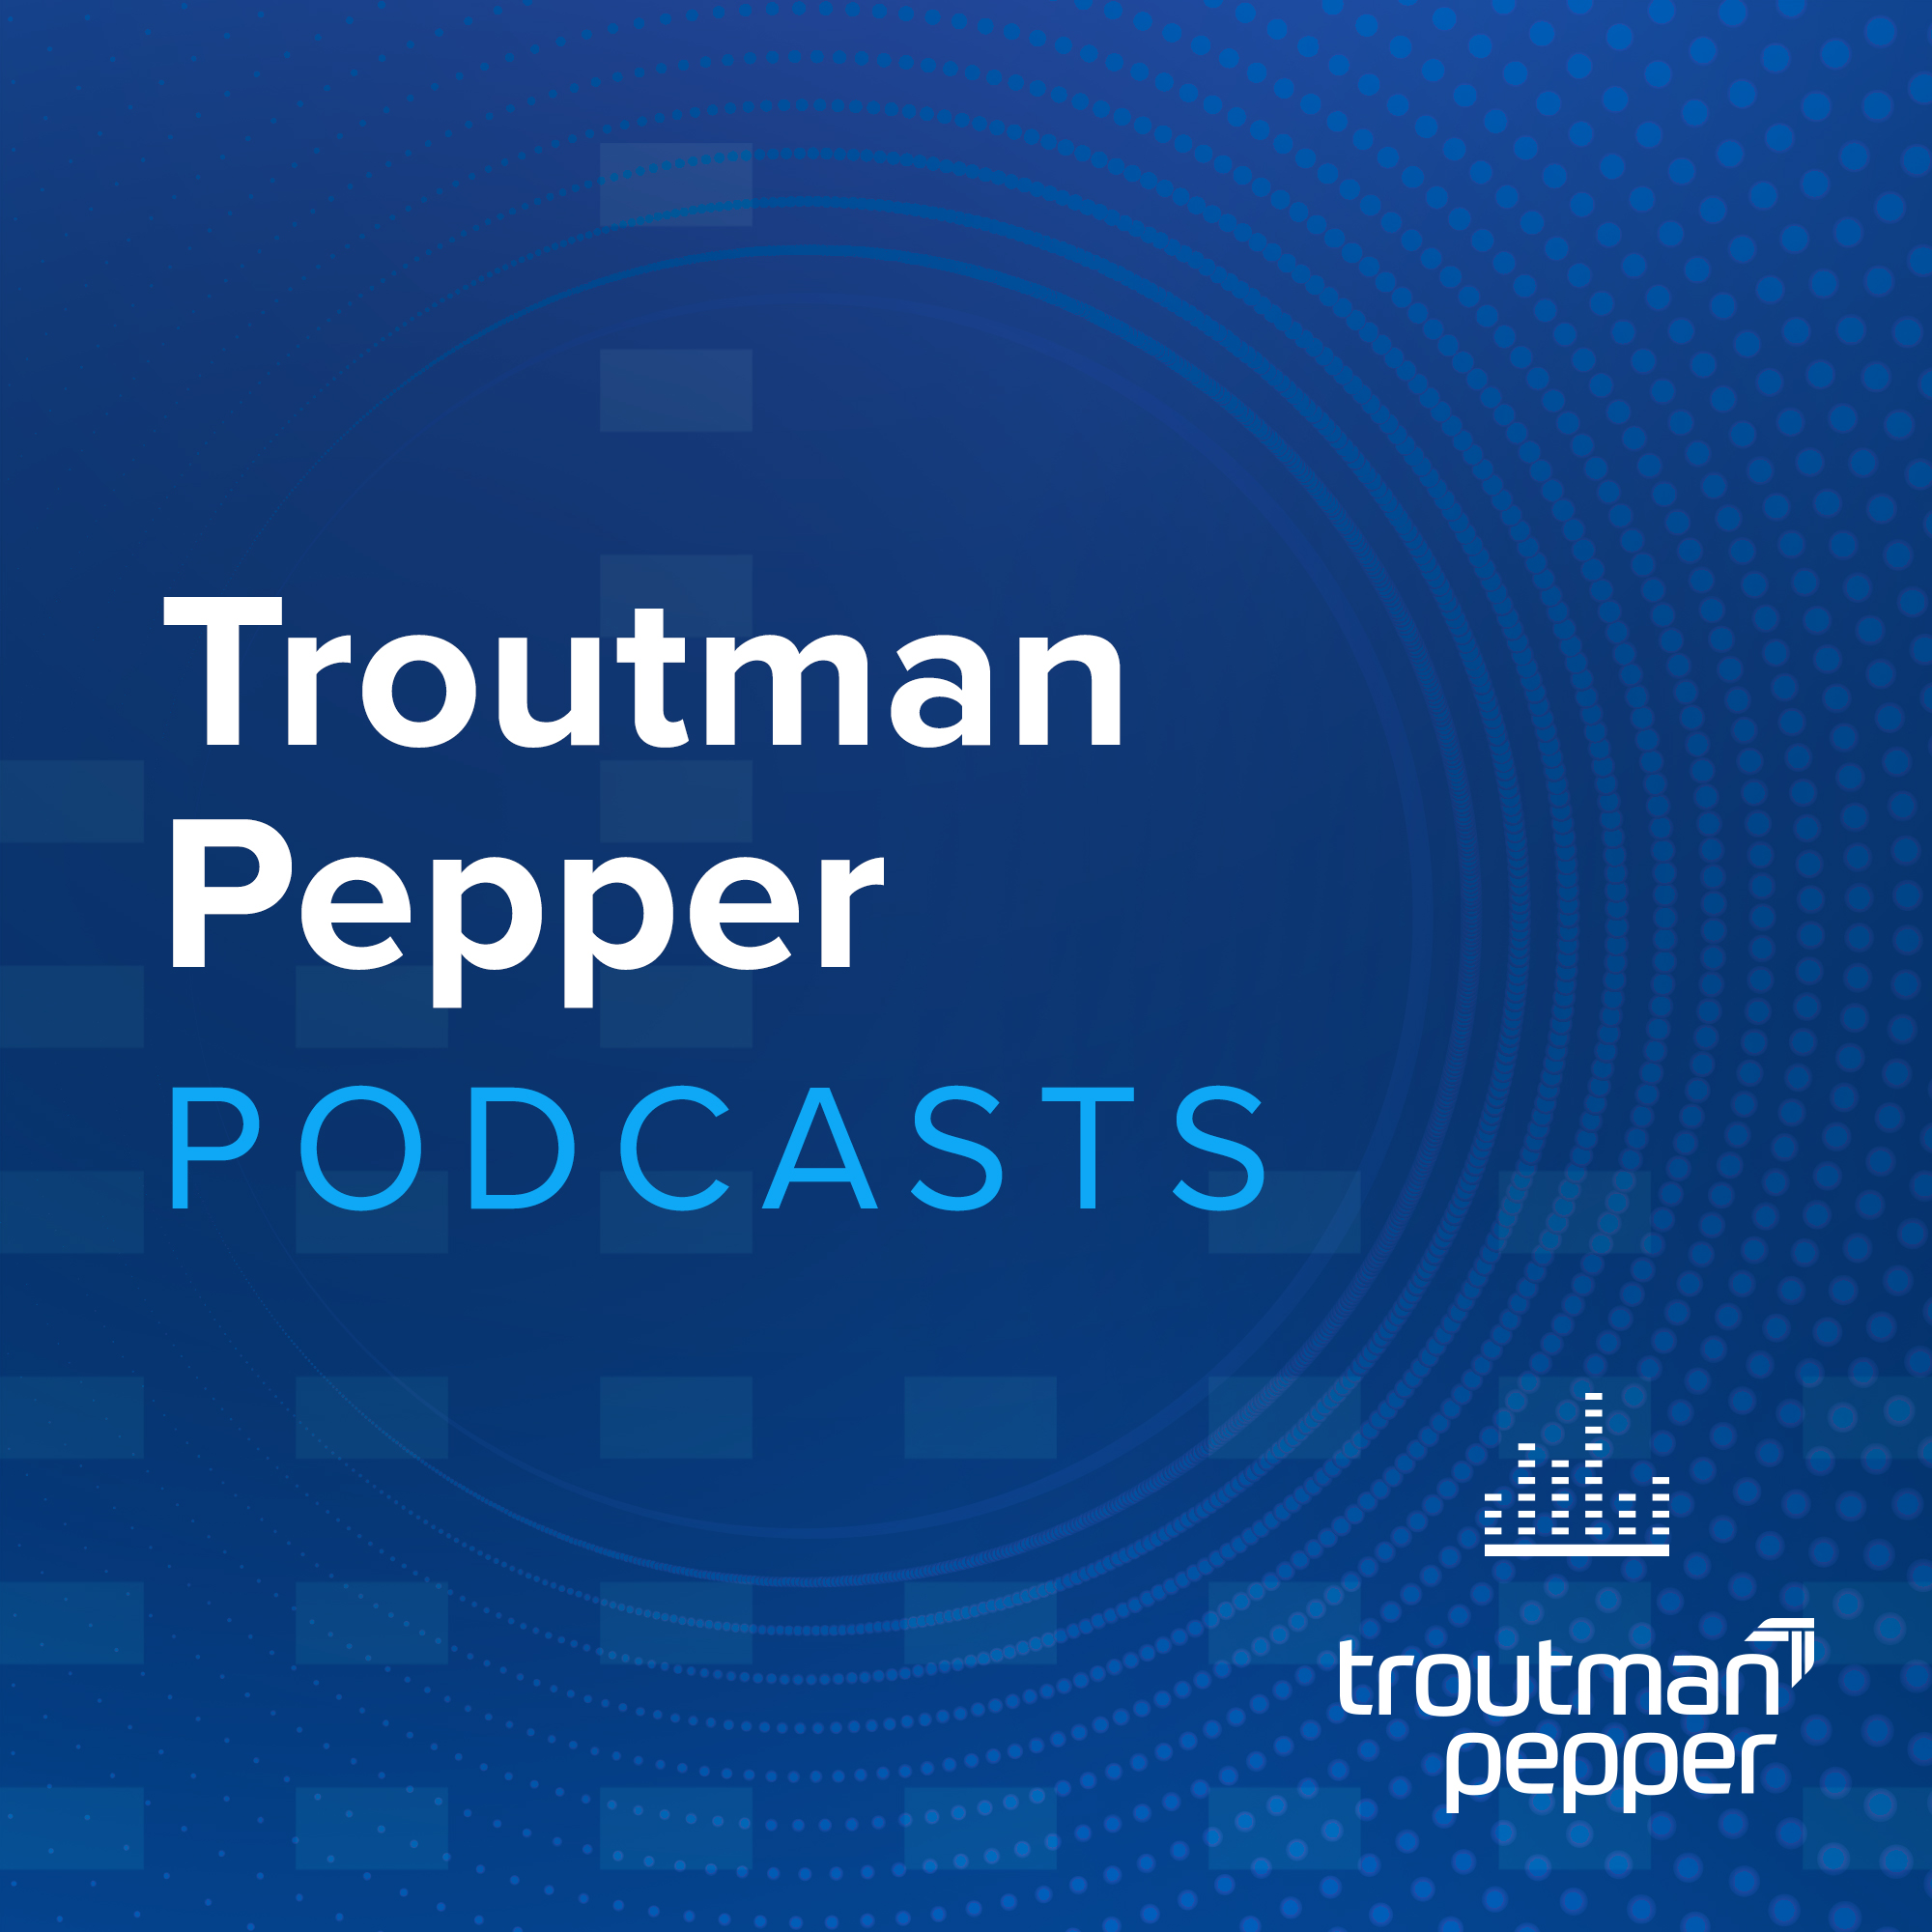 Troutman Pepper Podcasts logo